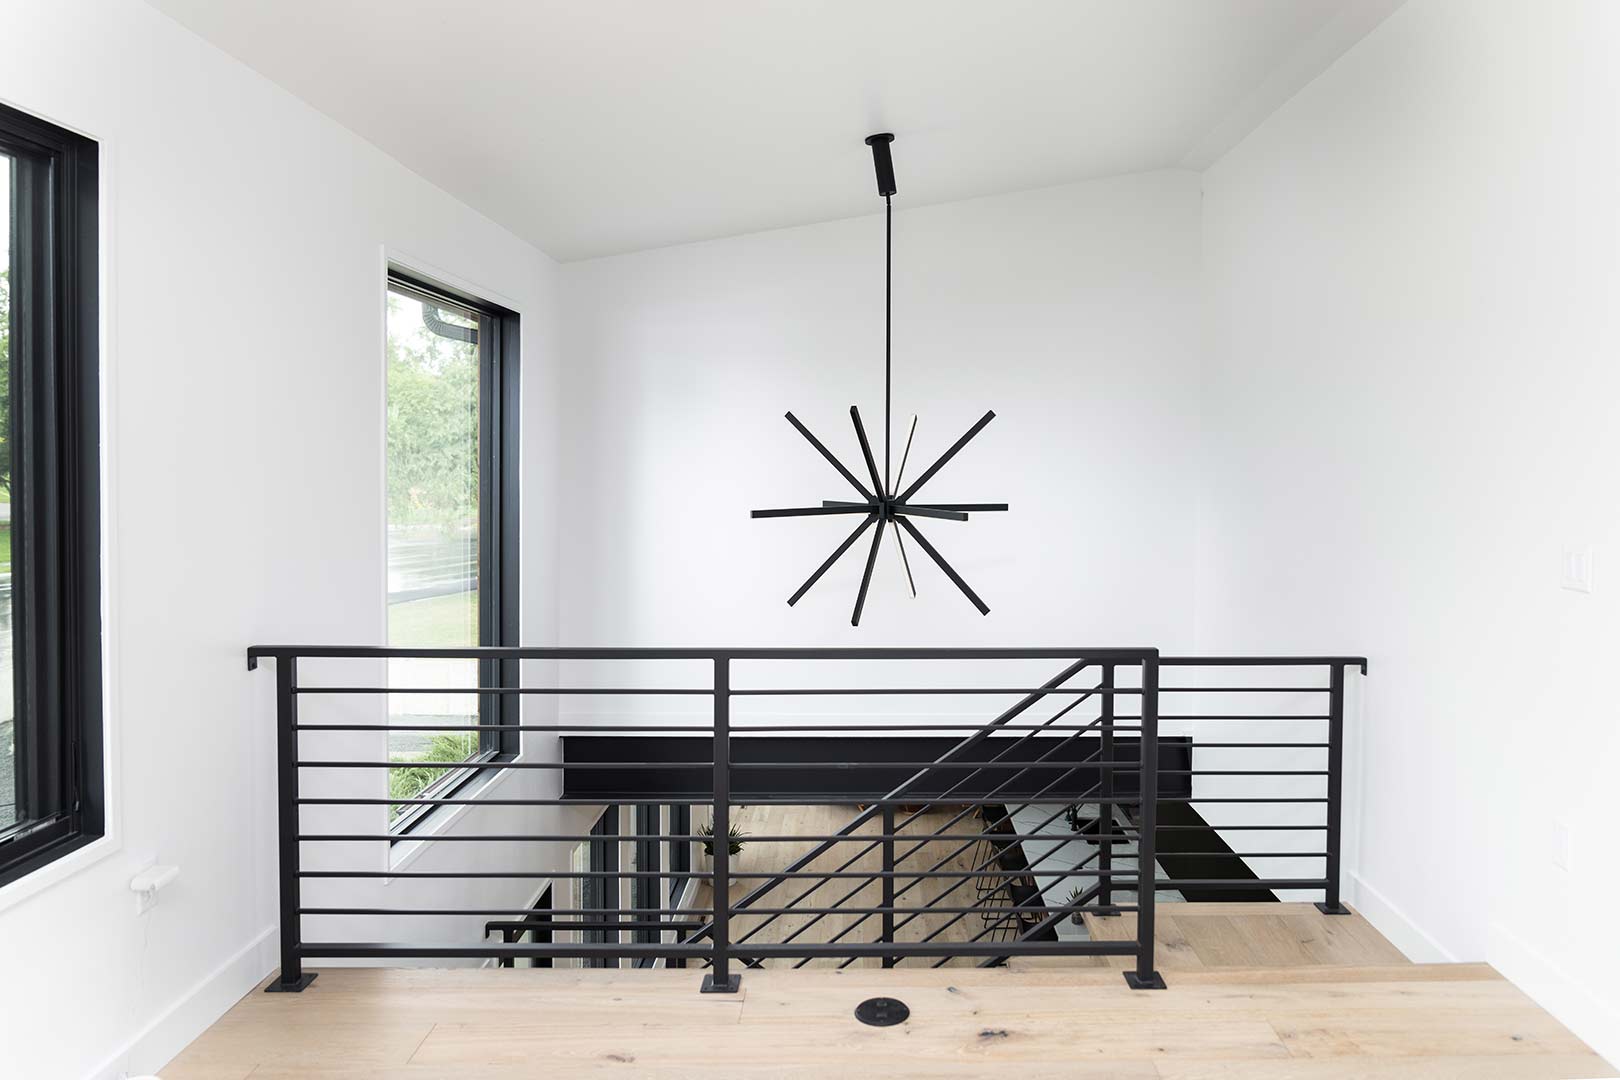 Additional view of the loft area showing the modern powder coated stair rail and a oversized modern light fixture 